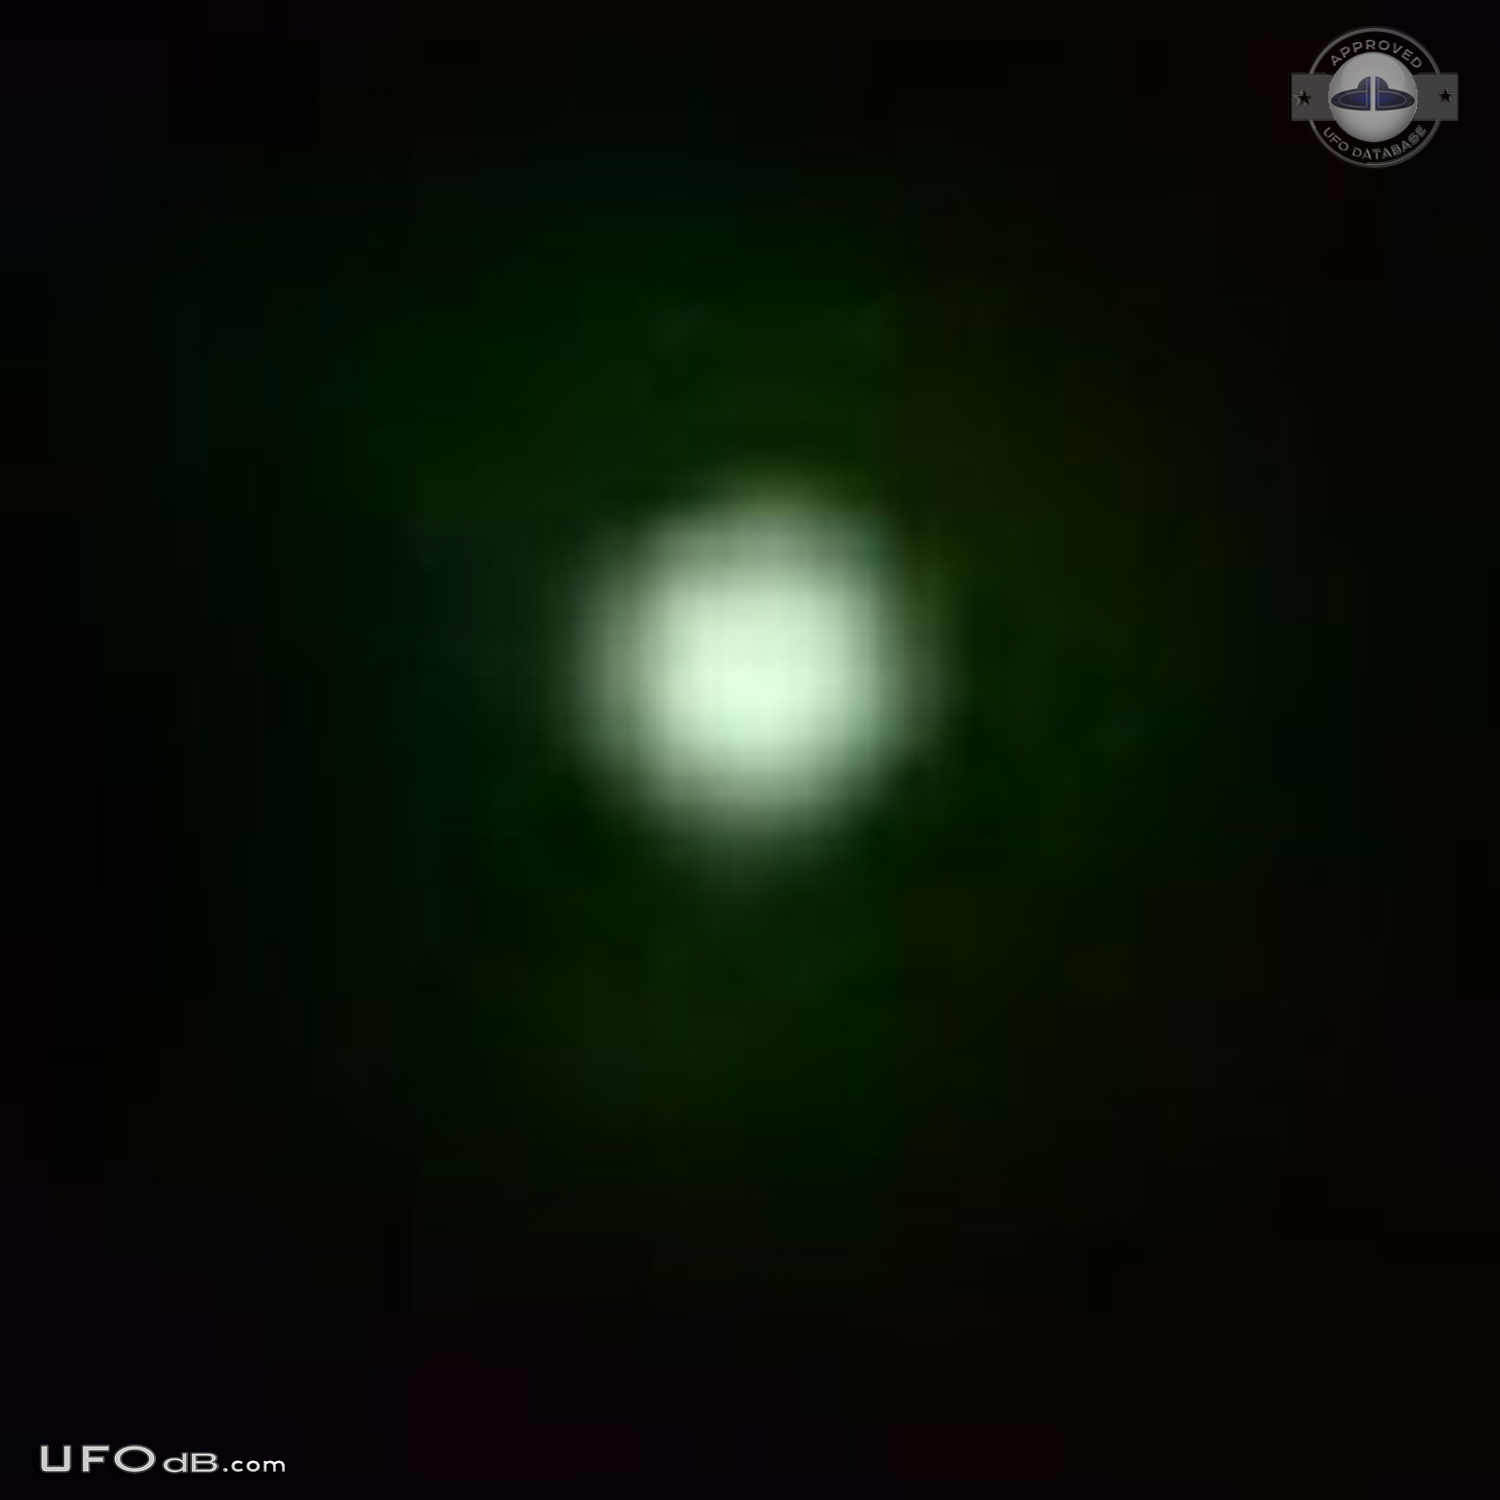 Fleet of 5 bright lights UFOs seen by many witnesses in Johannesburg UFO Picture #487-6